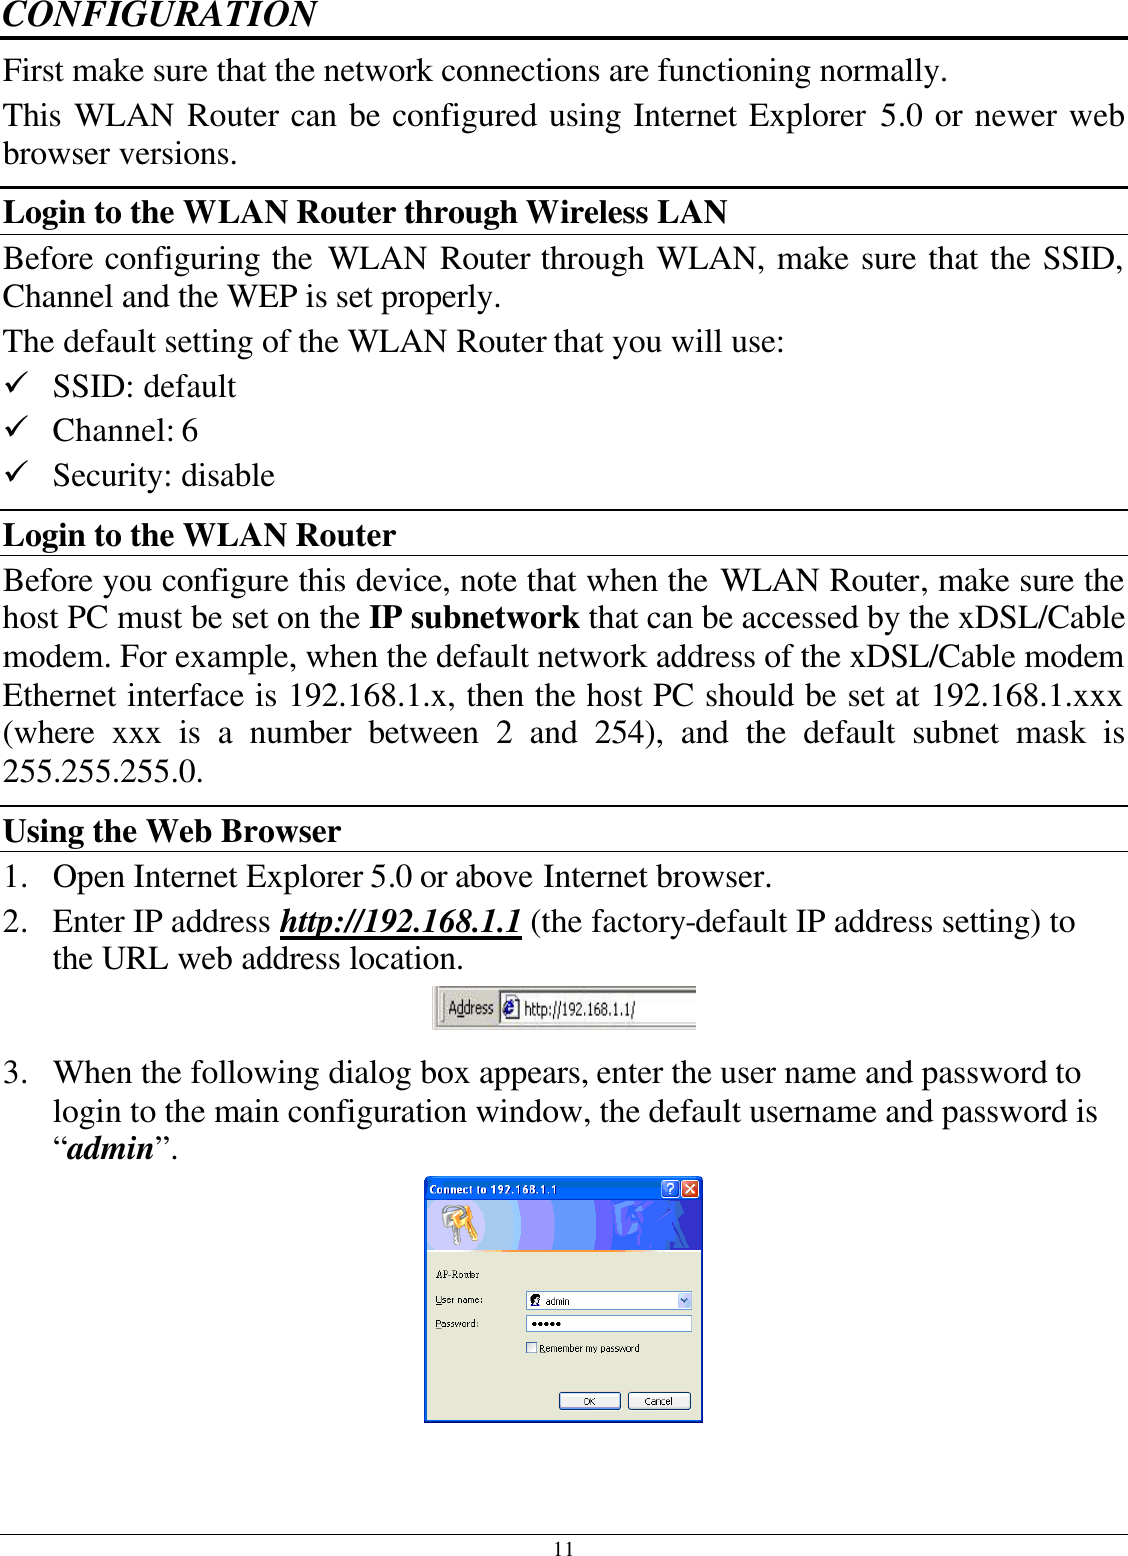 11 CONFIGURATION First make sure that the network connections are functioning normally.  This WLAN Router can be configured using Internet Explorer 5.0 or newer web browser versions. Login to the WLAN Router through Wireless LAN Before configuring the WLAN Router through WLAN, make sure that the SSID, Channel and the WEP is set properly. The default setting of the WLAN Router that you will use: ü SSID: default ü Channel: 6 ü Security: disable Login to the WLAN Router Before you configure this device, note that when the WLAN Router, make sure the host PC must be set on the IP subnetwork that can be accessed by the xDSL/Cable modem. For example, when the default network address of the xDSL/Cable modem Ethernet interface is 192.168.1.x, then the host PC should be set at 192.168.1.xxx (where xxx is a number between 2 and 254), and the default subnet mask is 255.255.255.0. Using the Web Browser 1. Open Internet Explorer 5.0 or above Internet browser. 2. Enter IP address http://192.168.1.1 (the factory-default IP address setting) to the URL web address location.  3. When the following dialog box appears, enter the user name and password to login to the main configuration window, the default username and password is “admin”.    